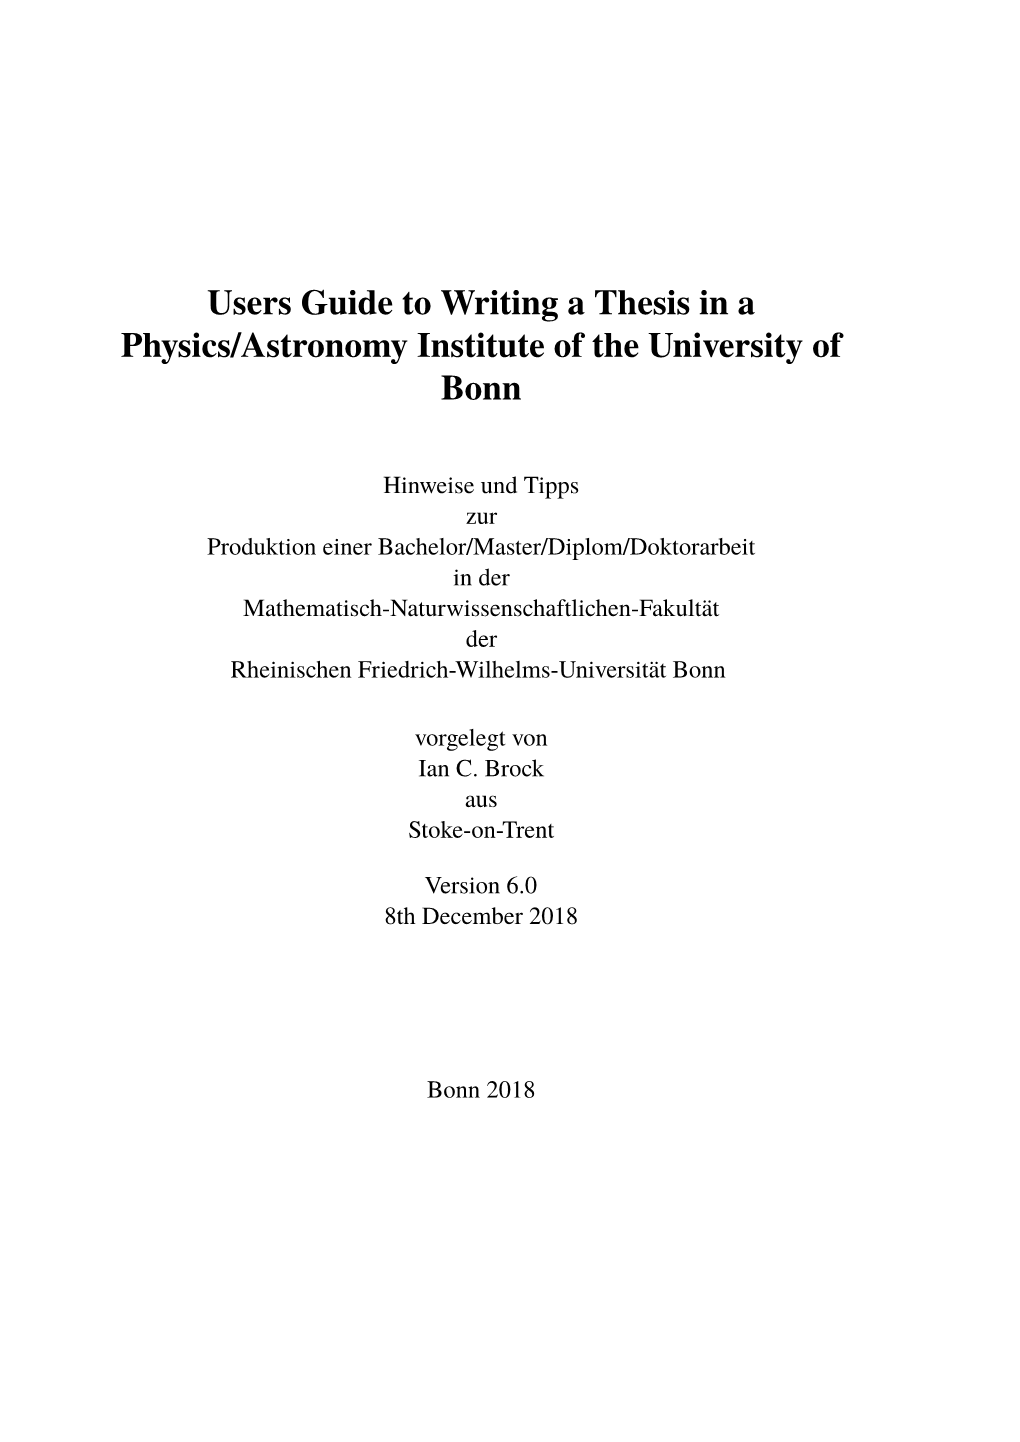 Users Guide to Writing a Thesis in a Physics/Astronomy Institute of the University of Bonn